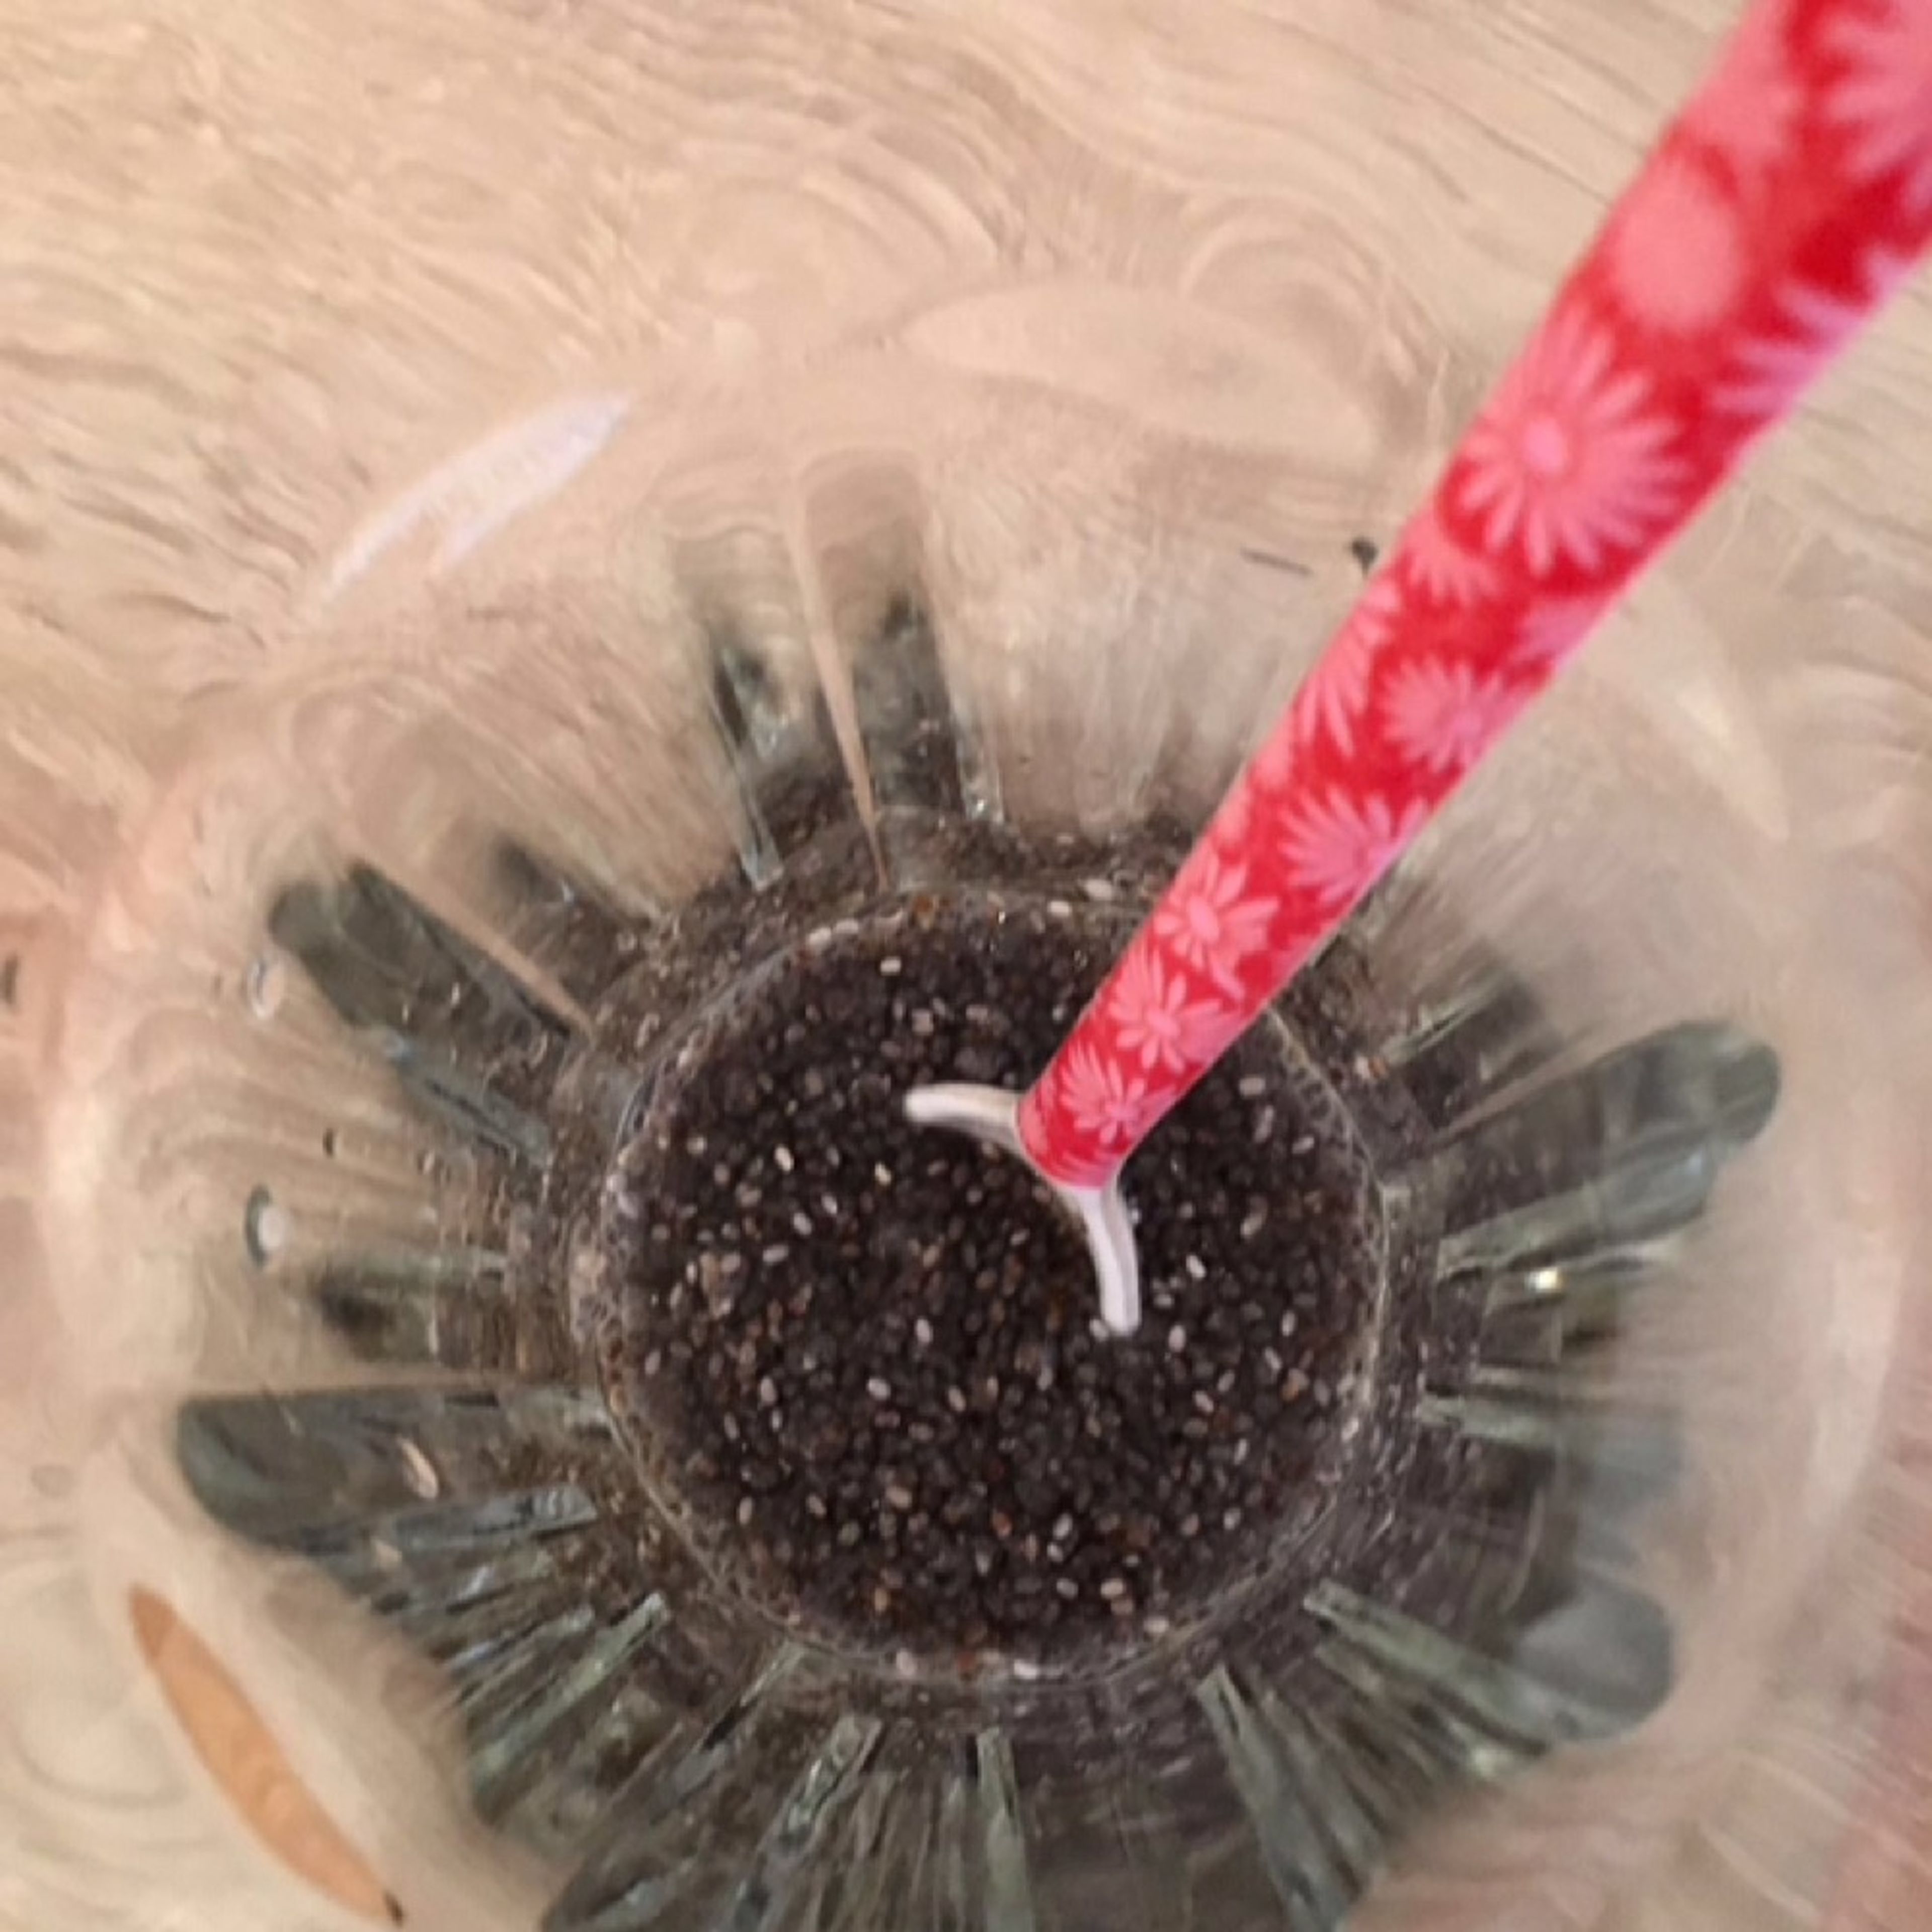 Add chia seeds and hot water to a tall glass, stir and let the seeds soak for approx. 3 min.